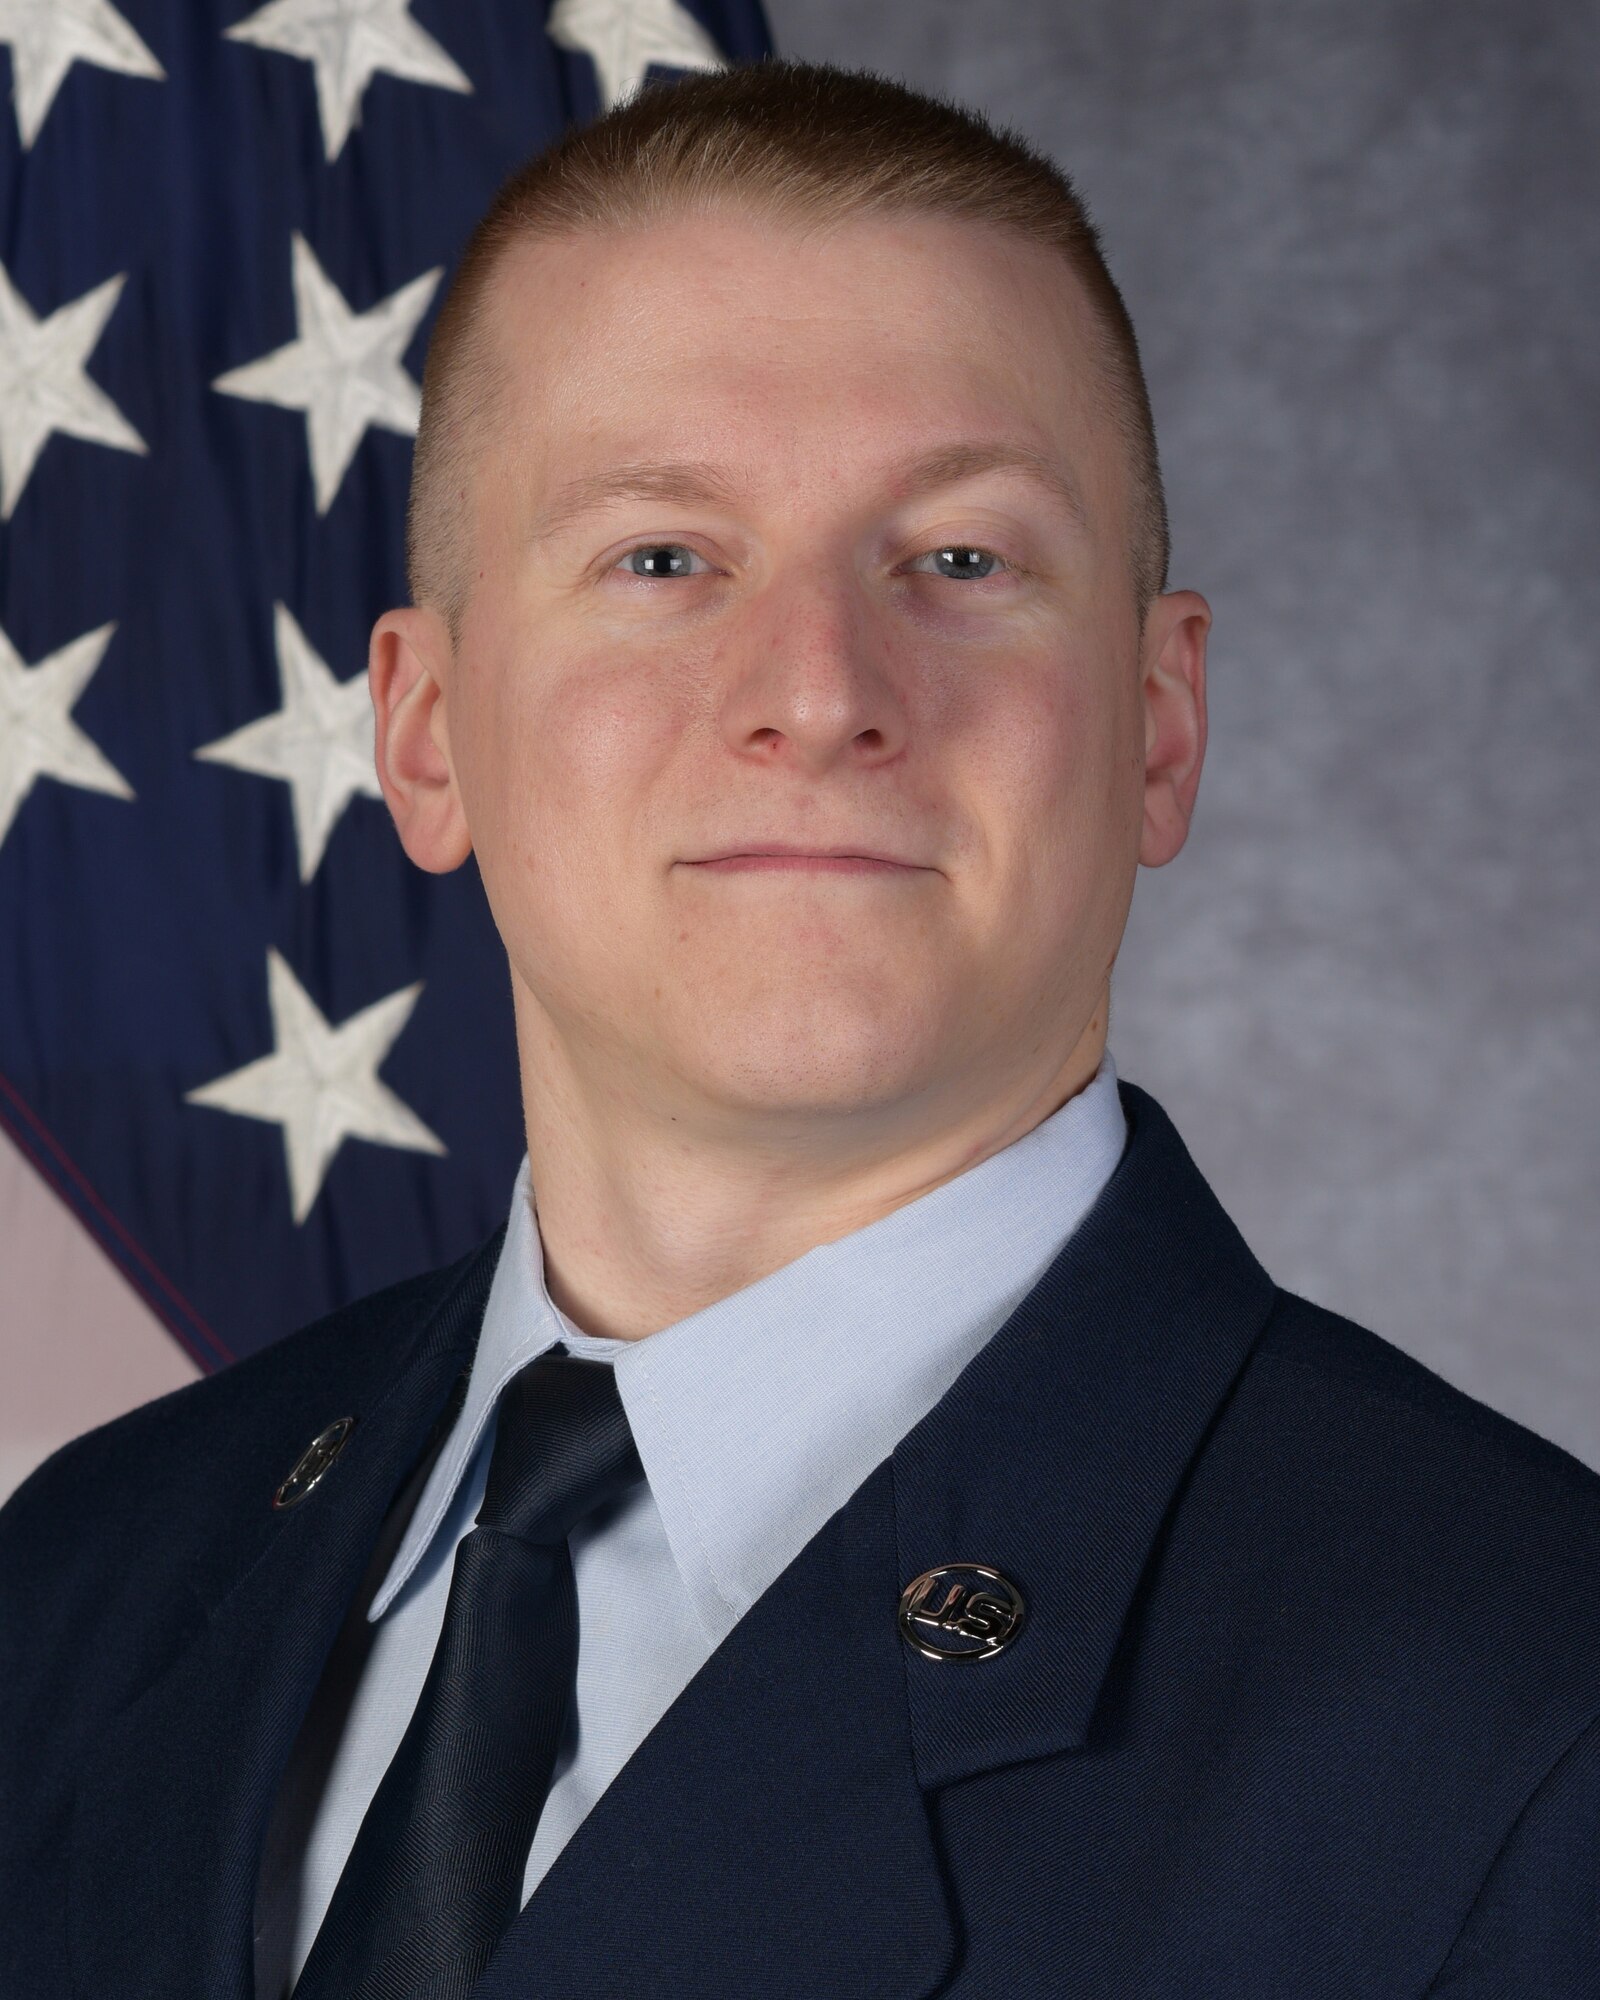 Staff Sgt. Banta poses for an official portrait